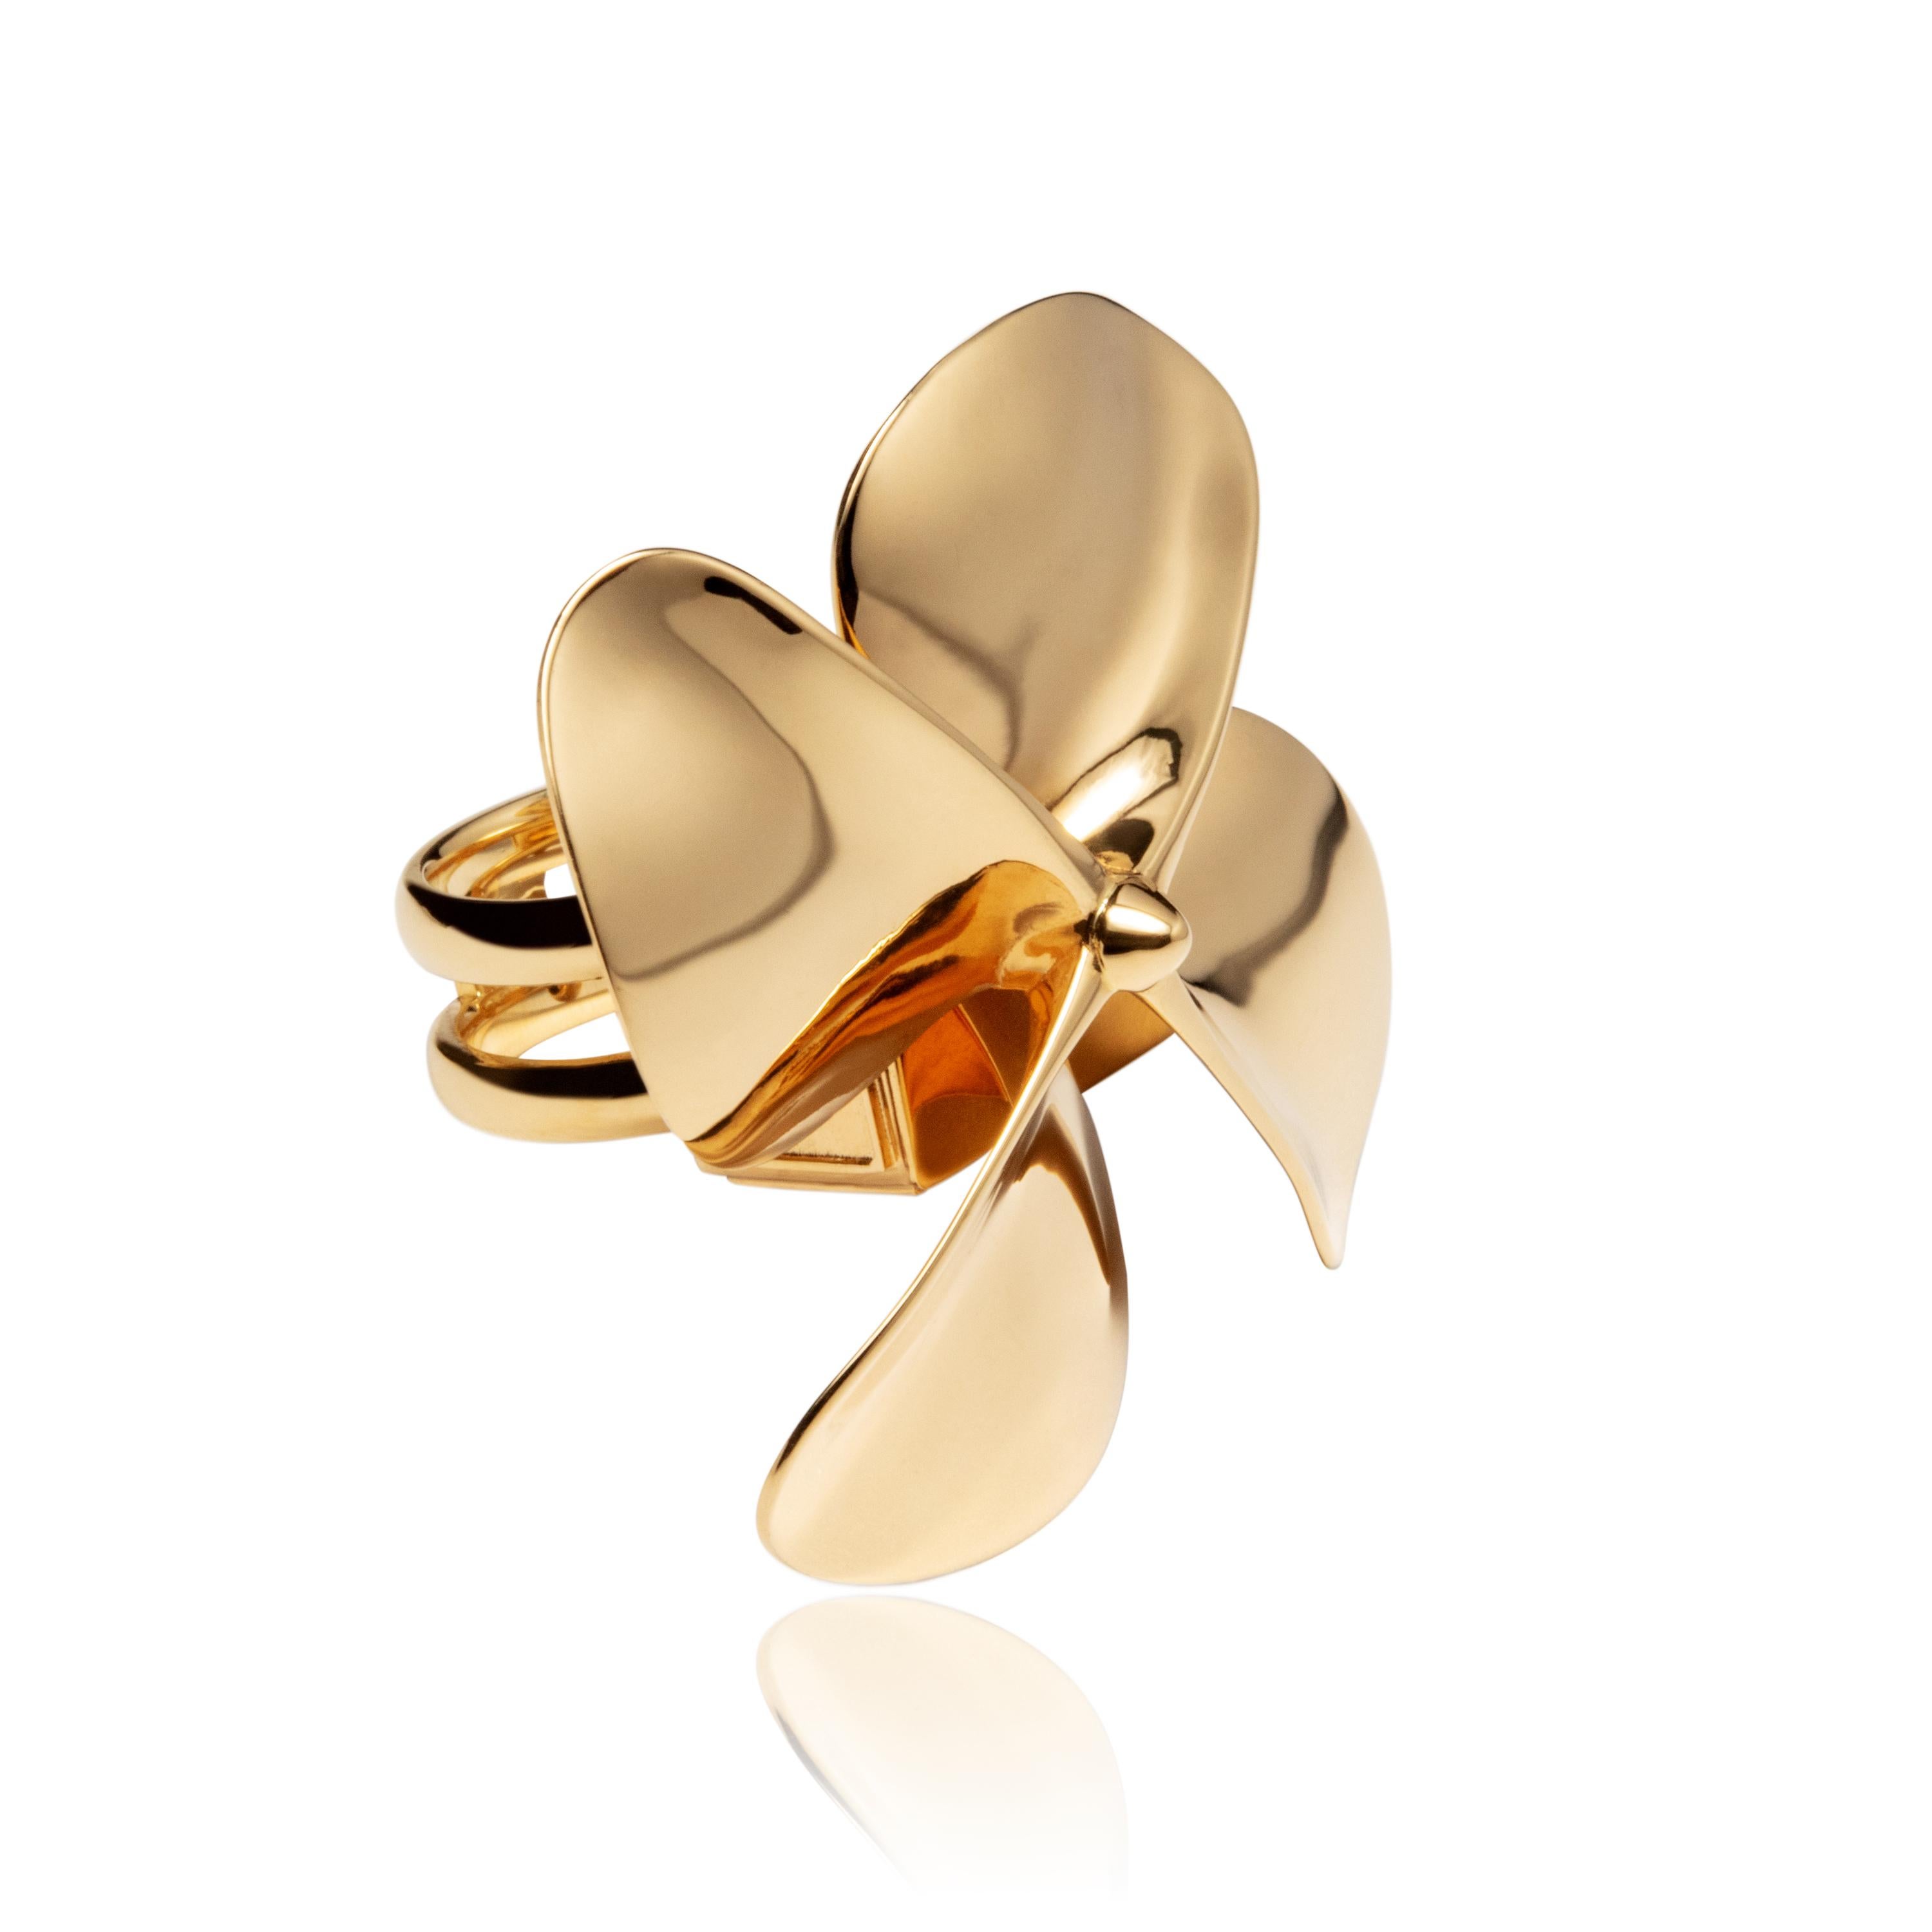 An Order of Bling creates “The Propeller Forward” Ring

Collection: In Whimsy We Play
18K Yellow Gold
Ring Size: Customisable

Principal designer Sara Sze enjoys creating pieces with the intention of making someone smile. 

This extra special piece